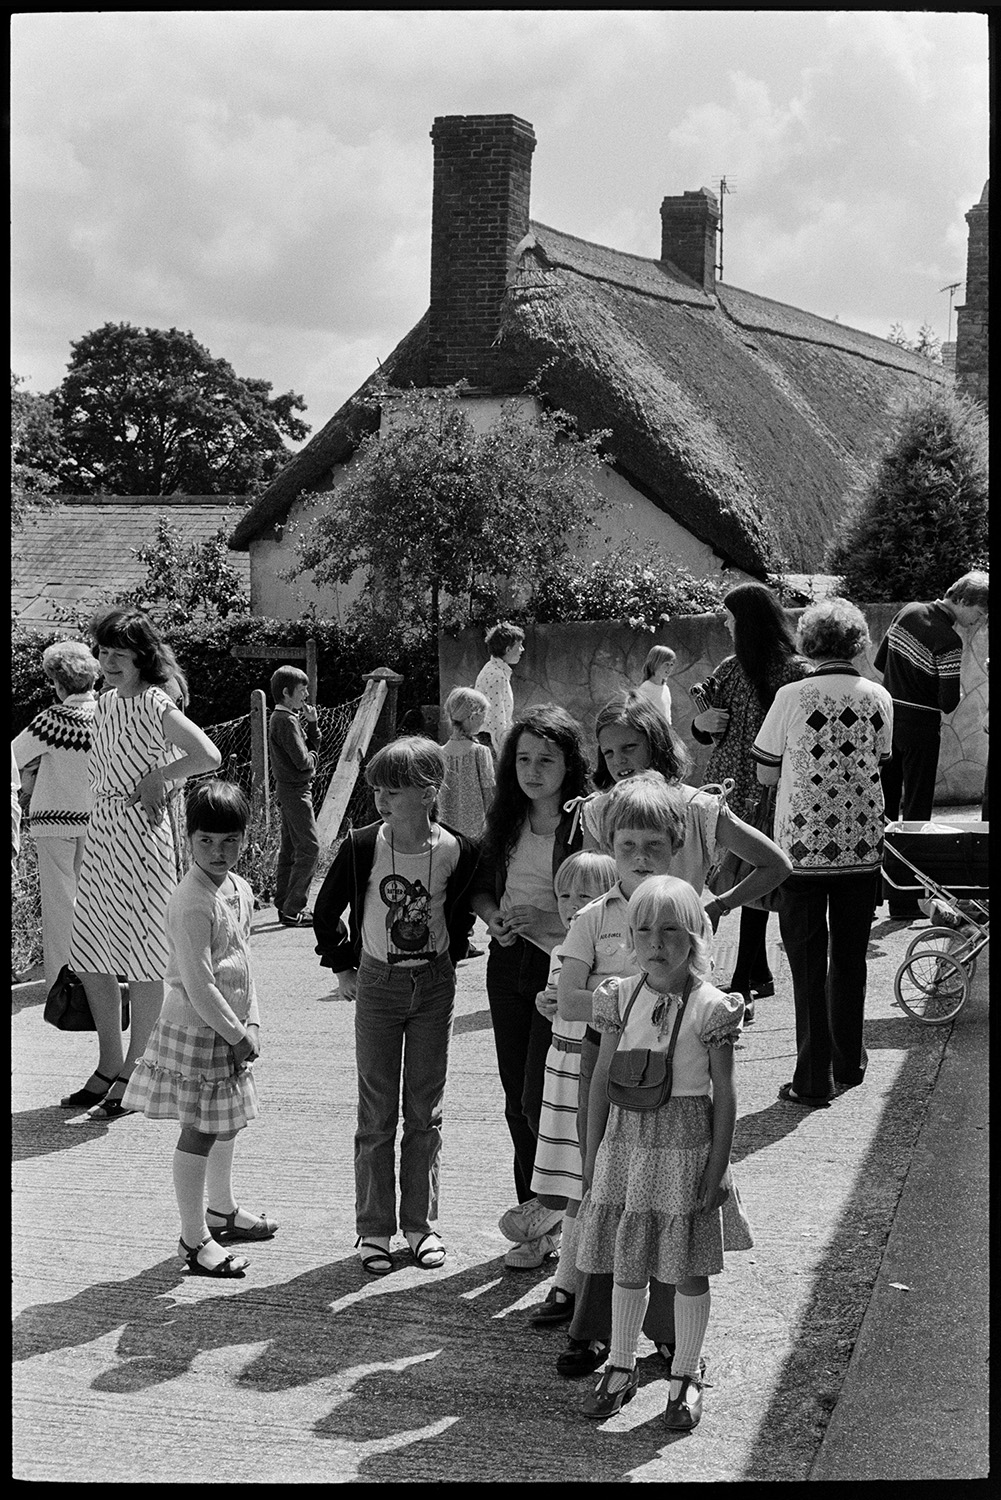 Children waiting for pony ride outside village hall. 
[Children lined up waiting for a pony ride at Dolton Village Hall. Women are waiting nearby and a thatched cottage can be seen in the background.]